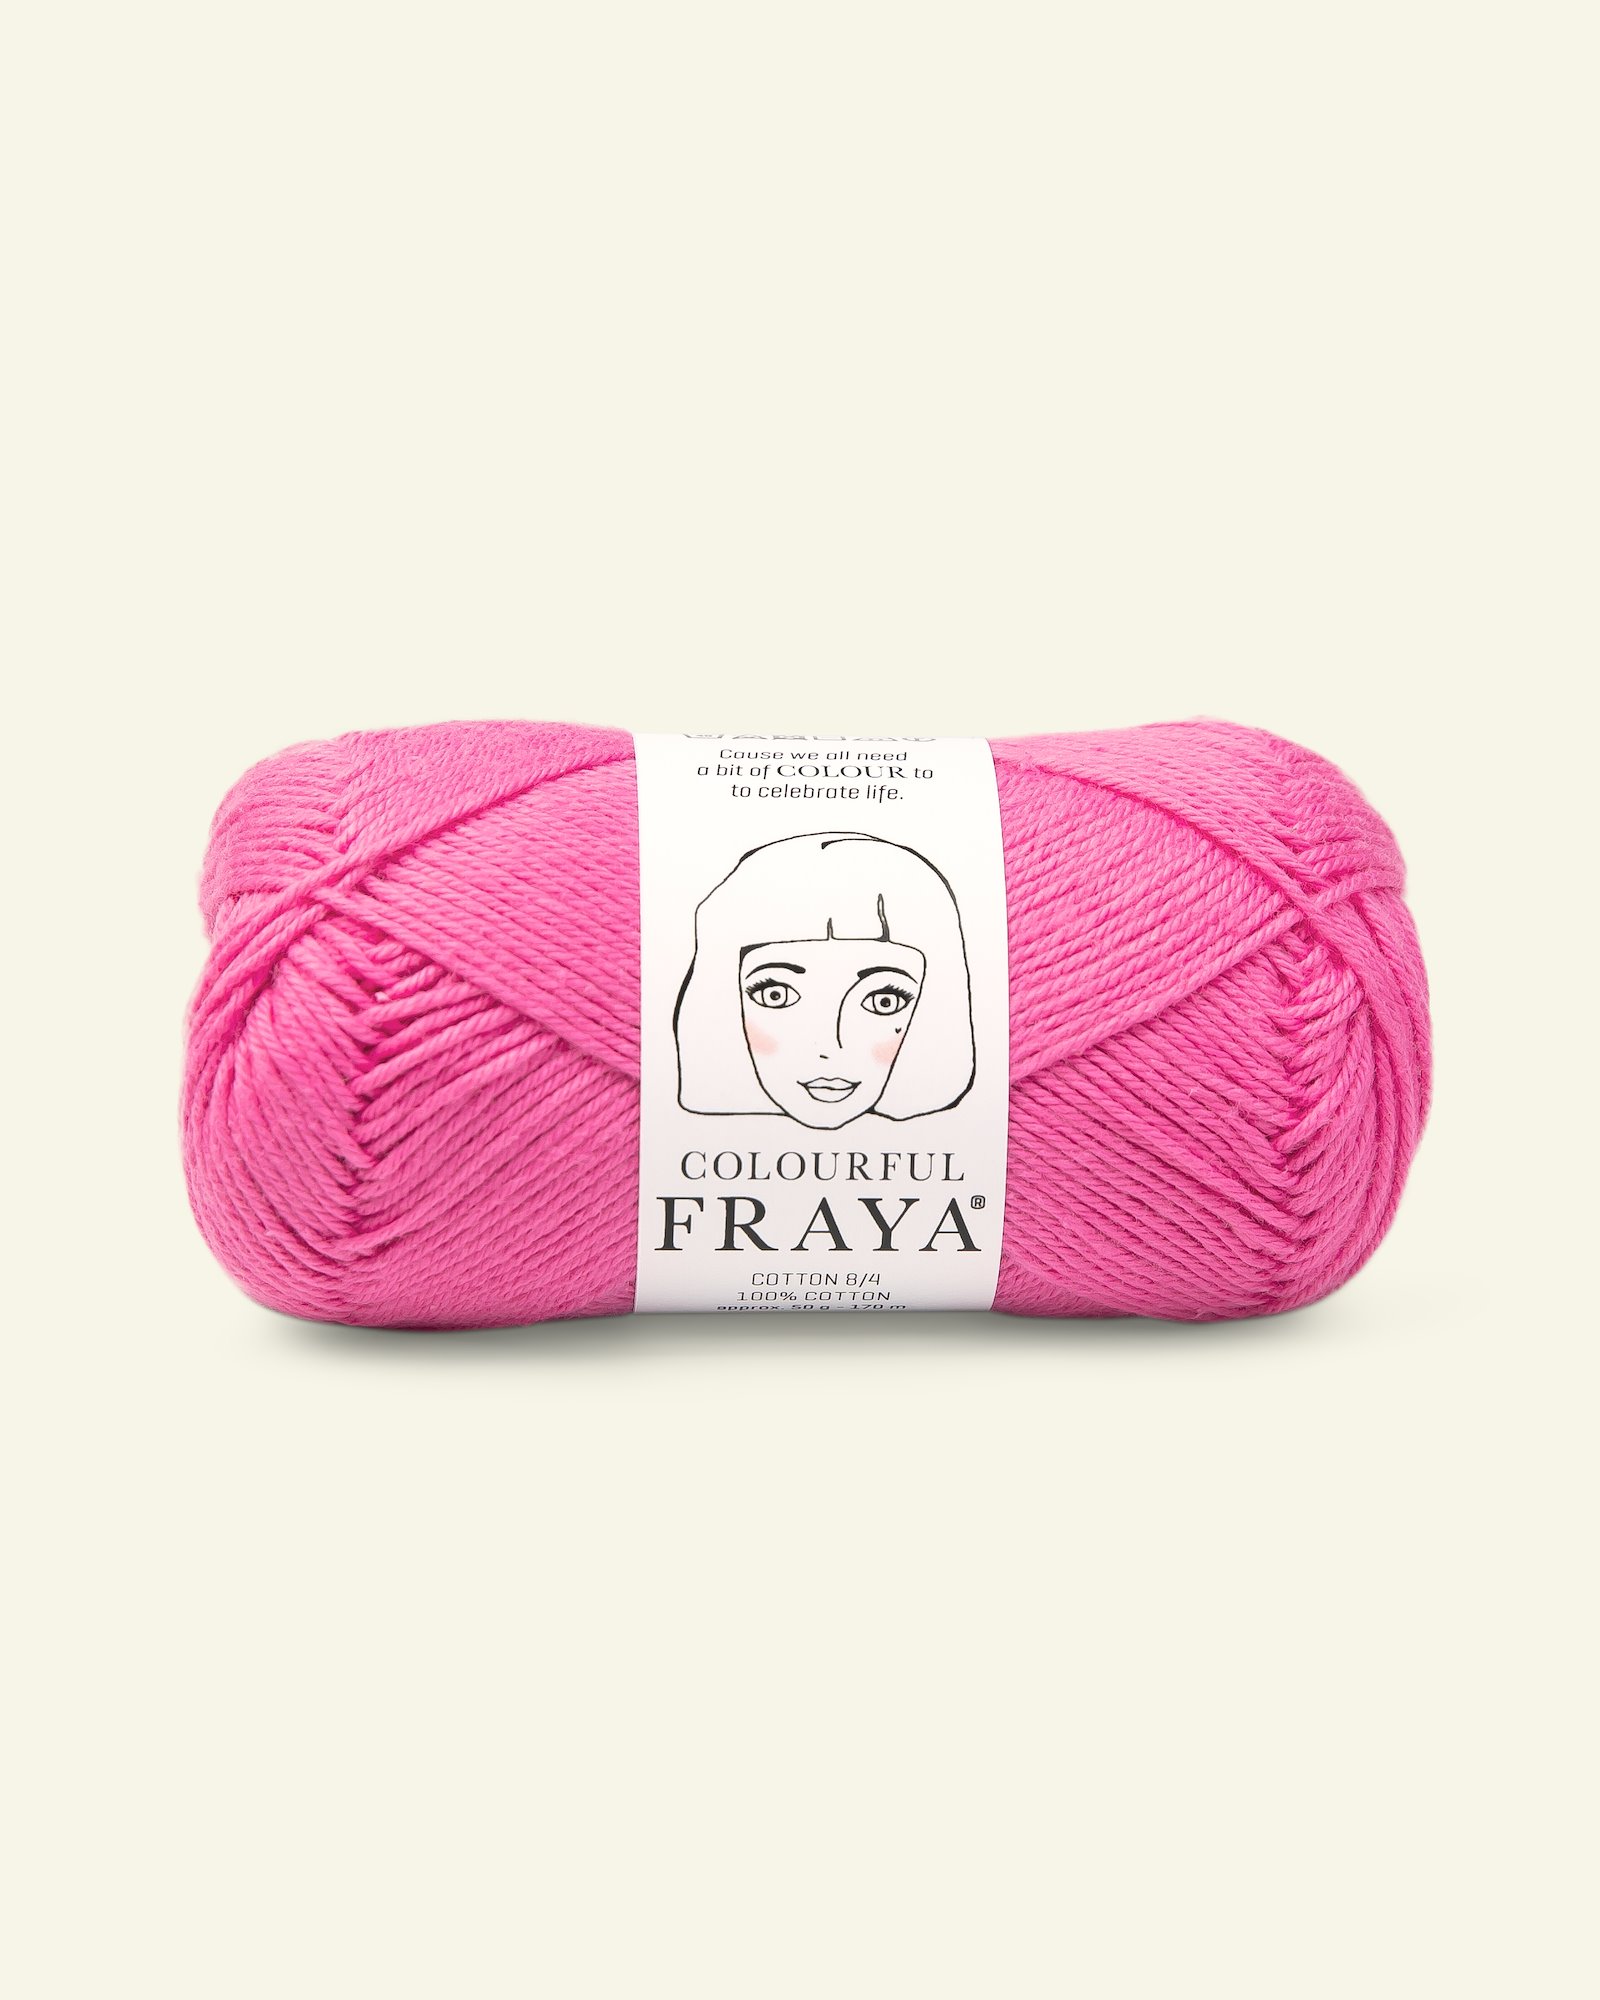 FRAYA, 100% Baumwolle, Cotton 8/4, "Colourful", Pink 90060010_pack